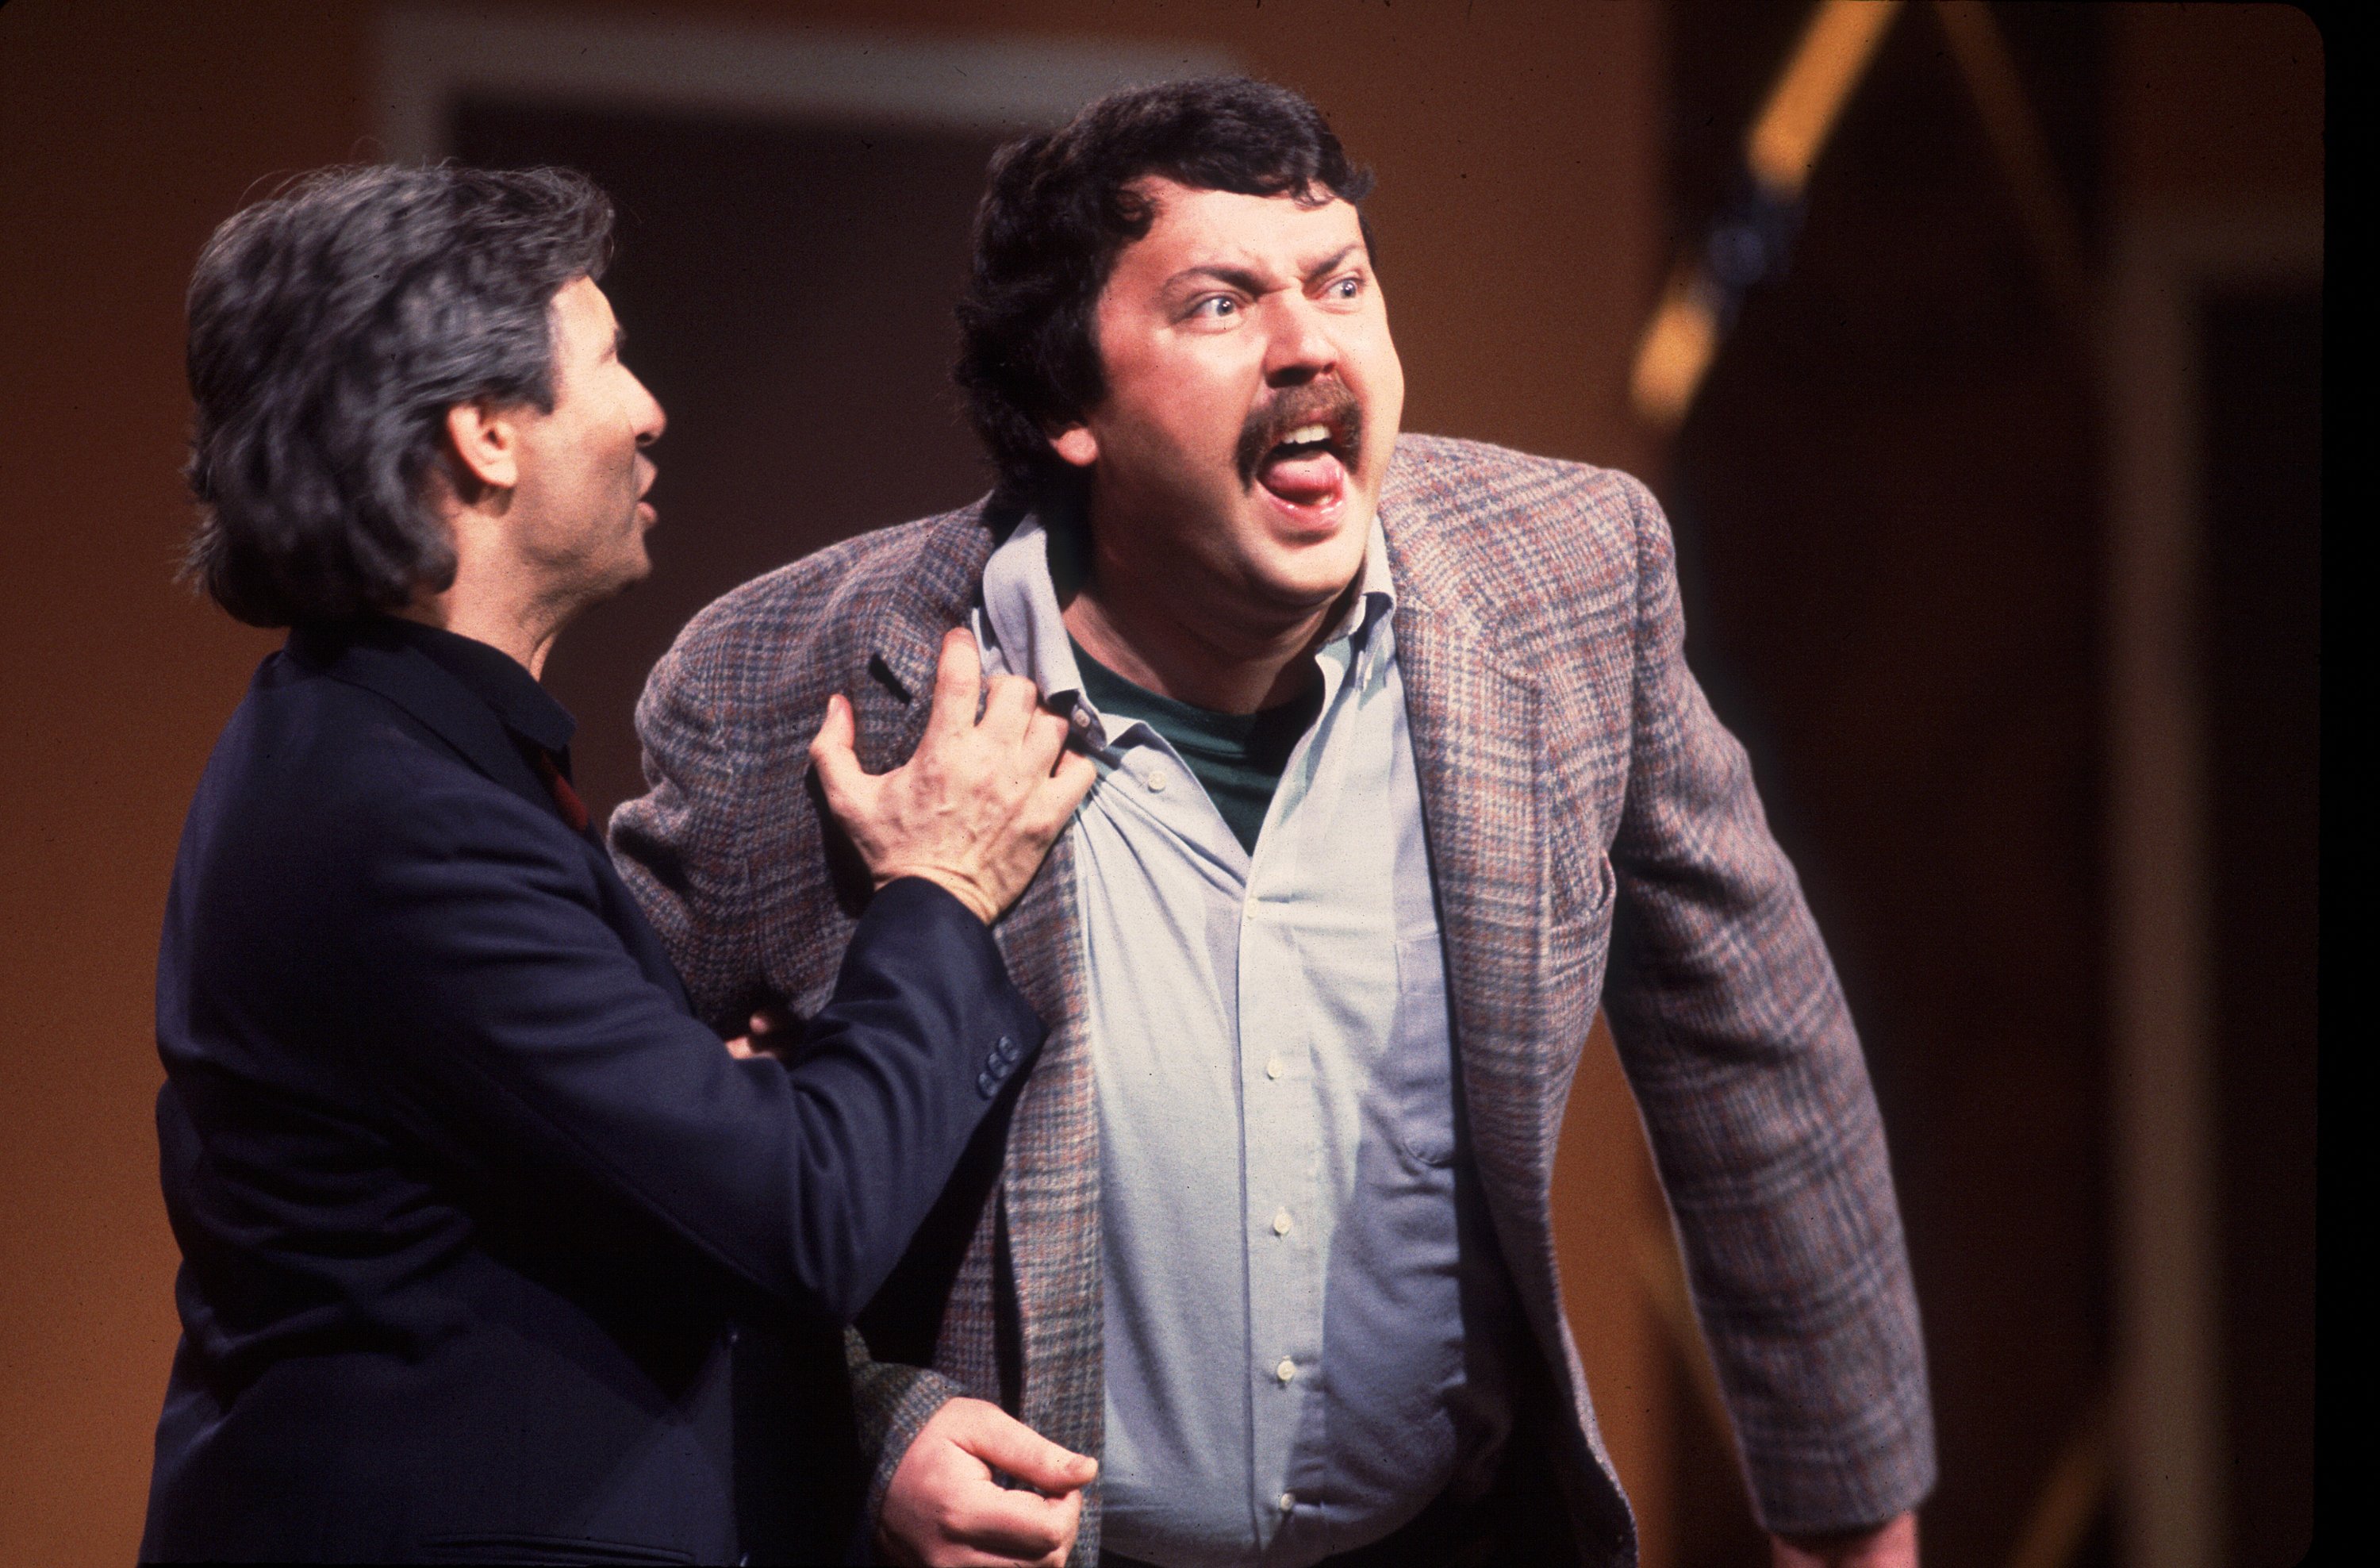 Canadian comedian David Steinberg and American comedian Mike Hagerty perform onstage during the Second City 25th Anniversary performance at the Vic Theater, Chicago, Illinois, December 16, 1984. | Source: Getty Images